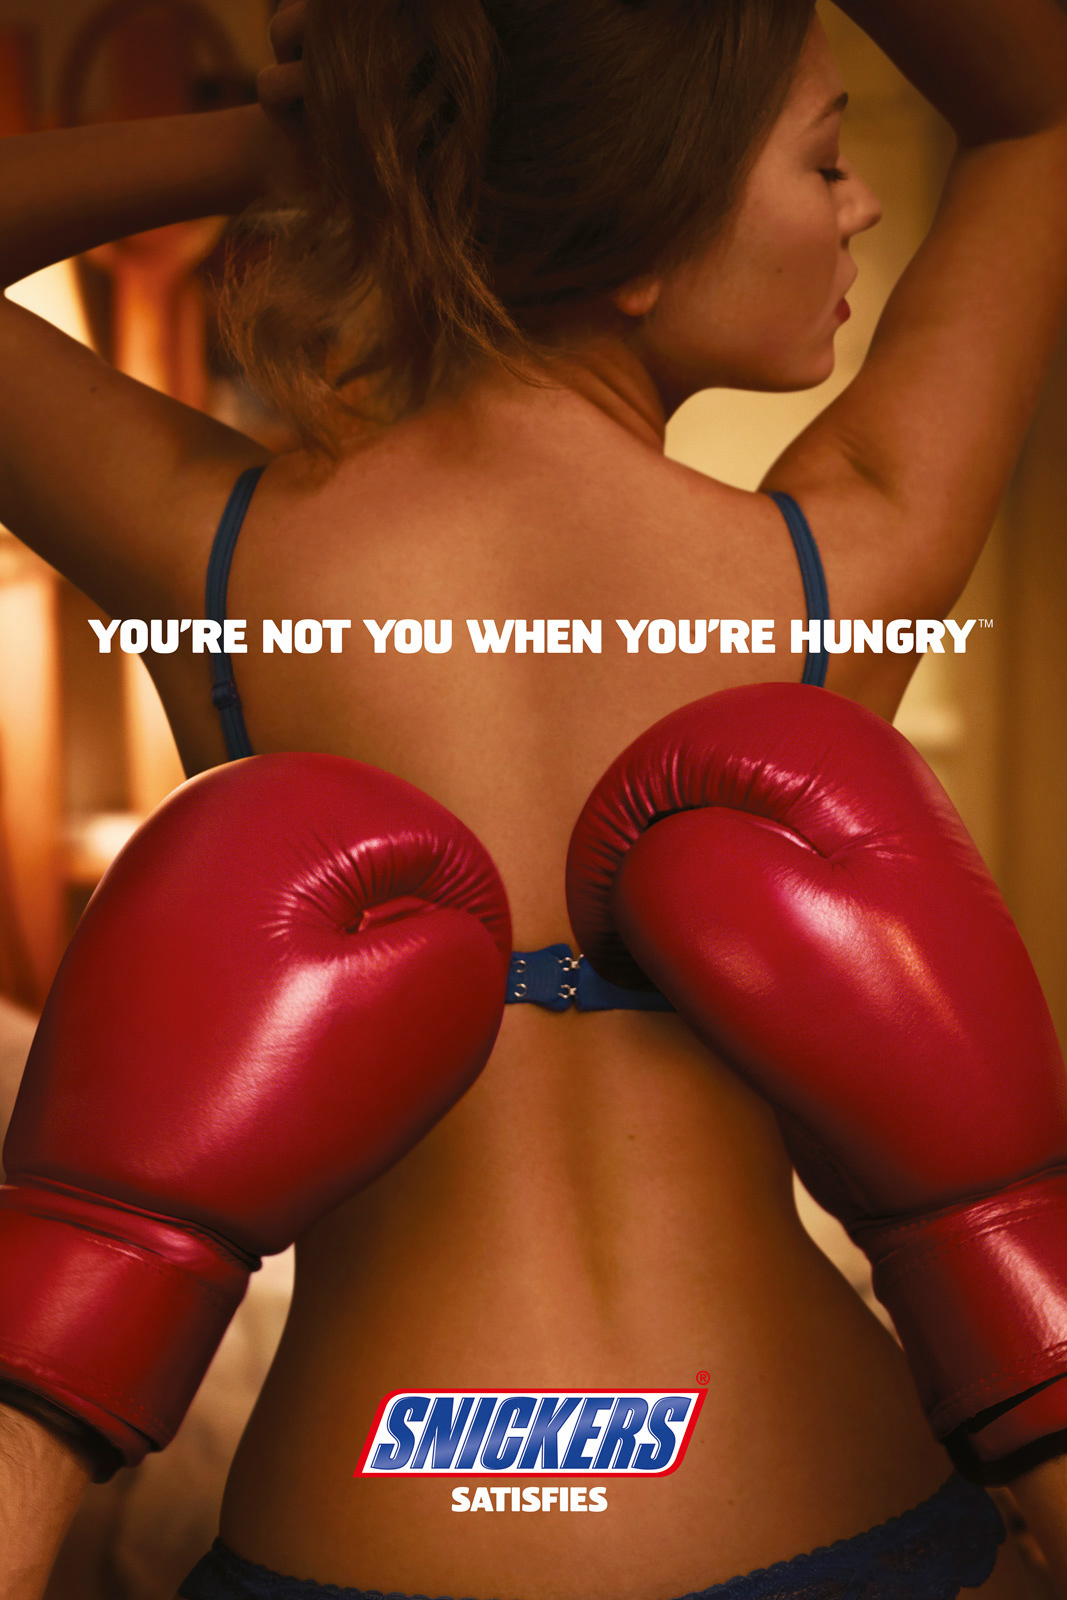 Boxer gloves girl Snickers bra chocolate Hungry hunger fail sex trying